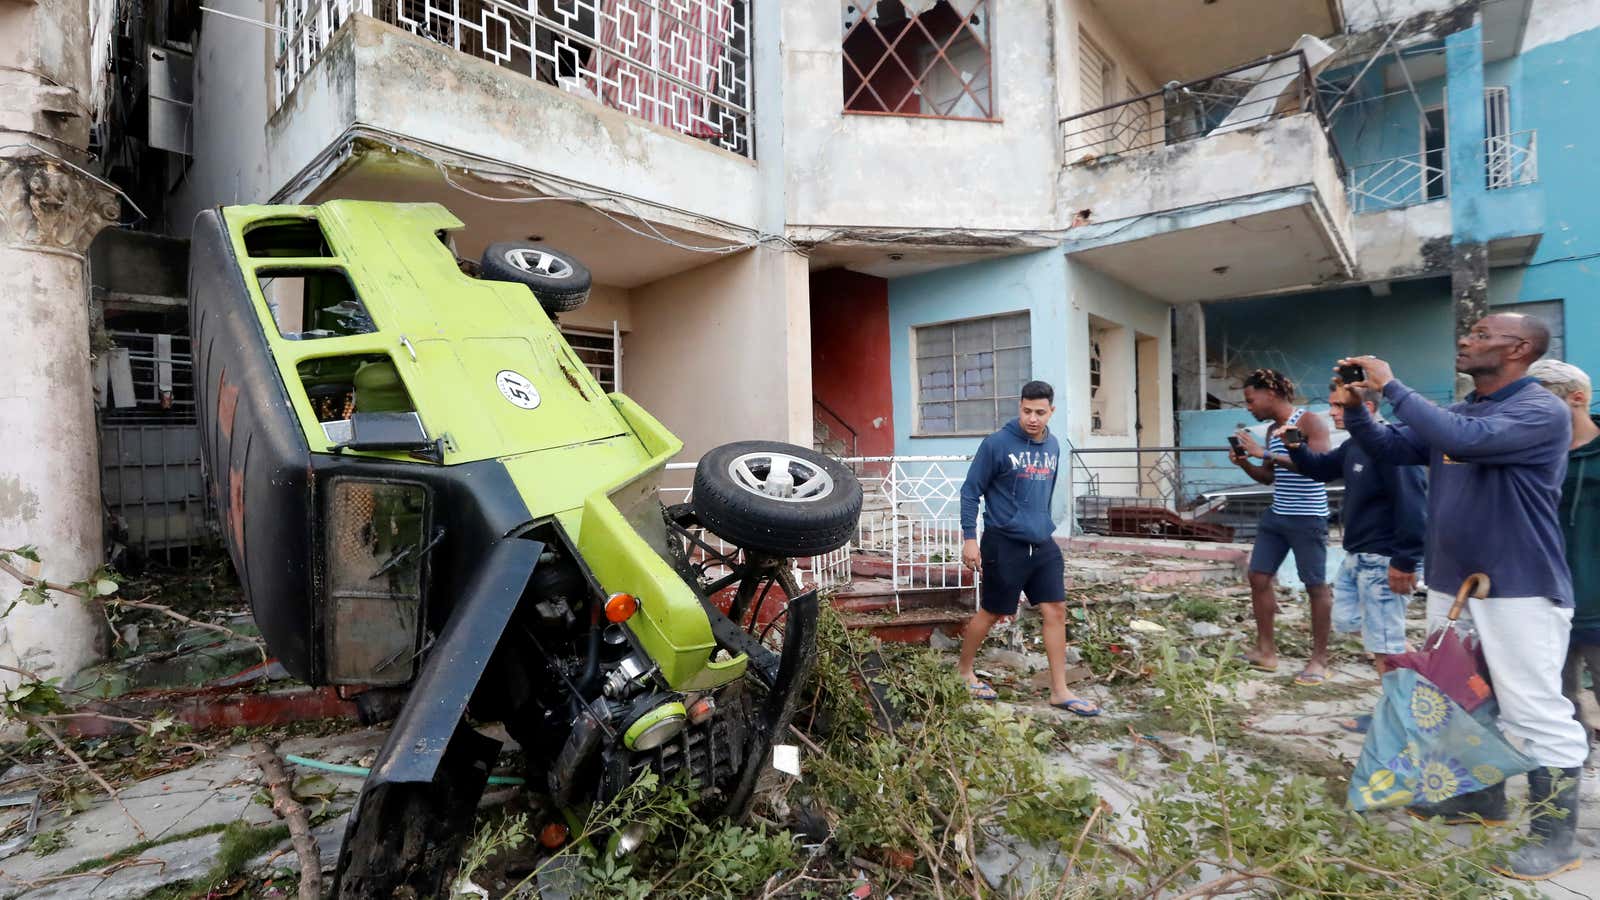 Residents look at a vehicle toppled by a tornado in Havana.